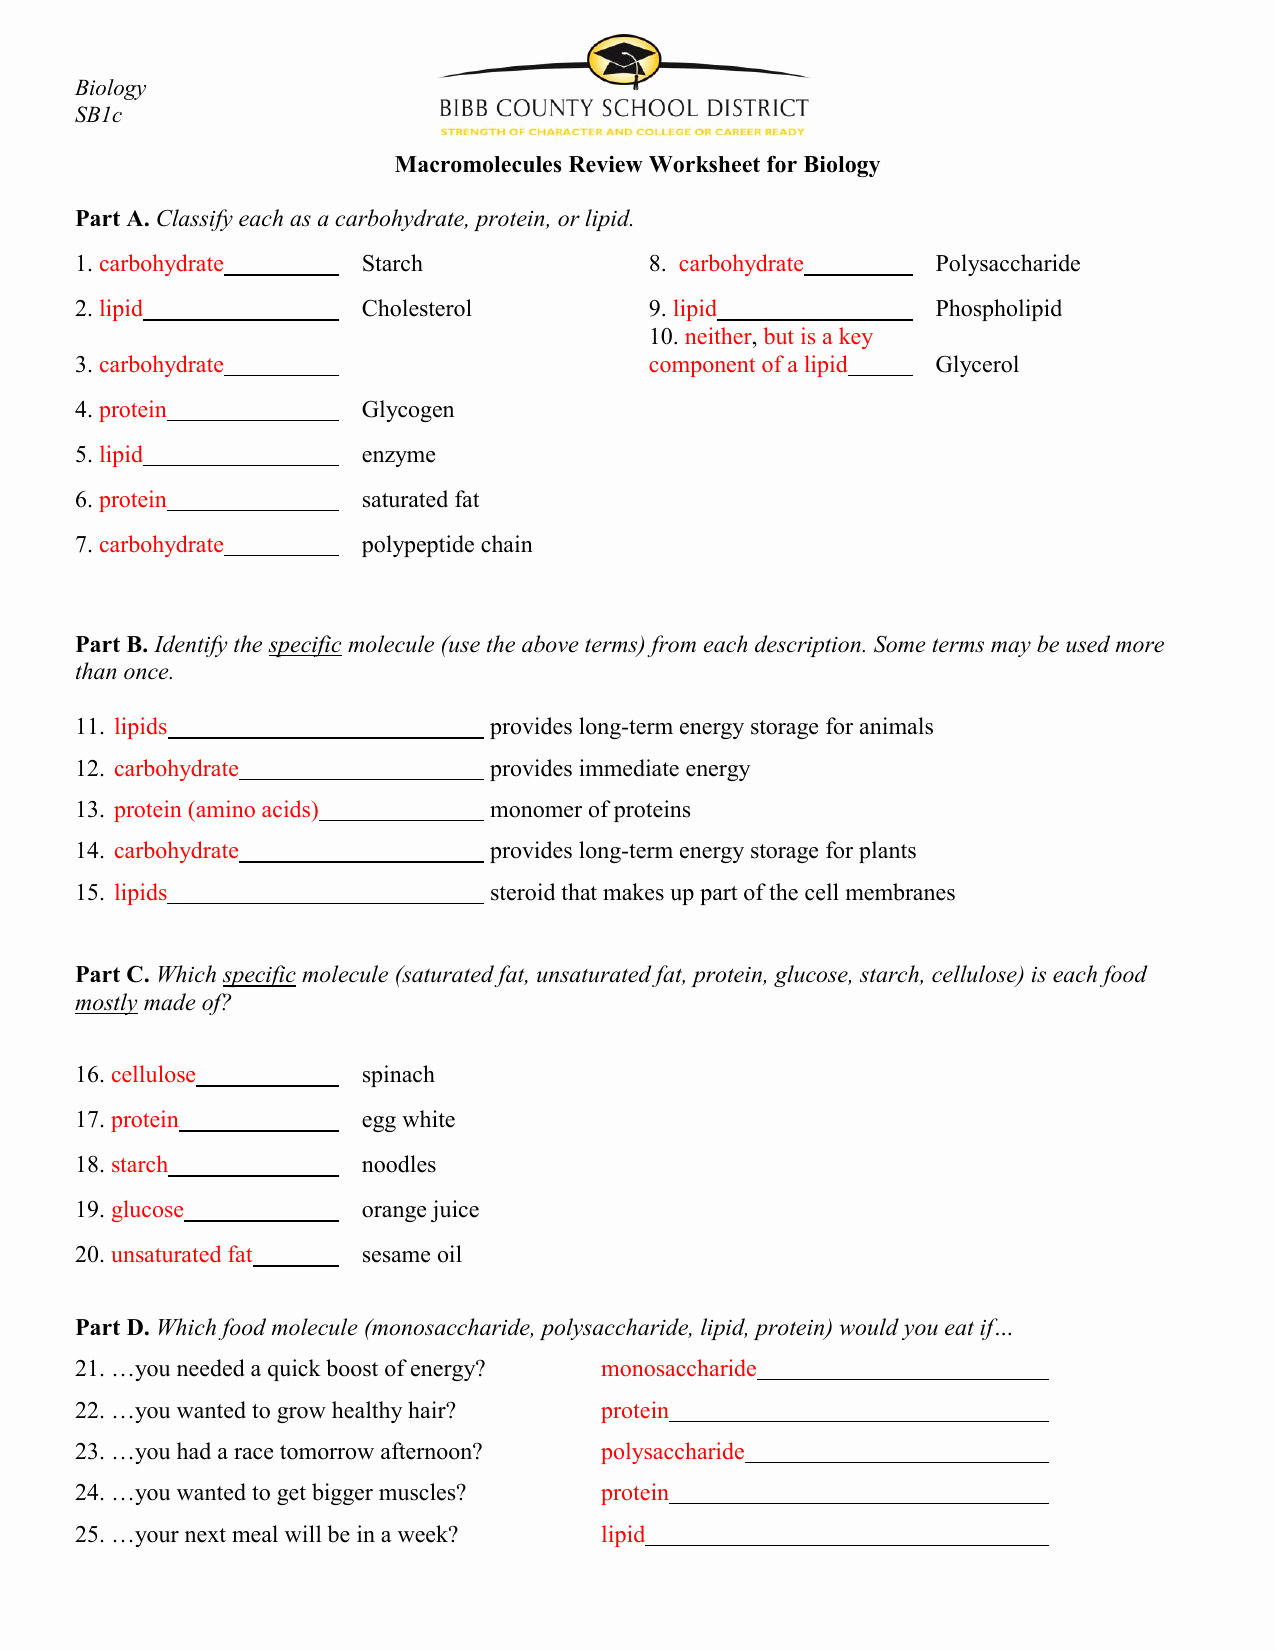 Lipids Worksheet Answer Key Beautiful Chemistry Carbohydrates Proteins and Lipids Worksheet